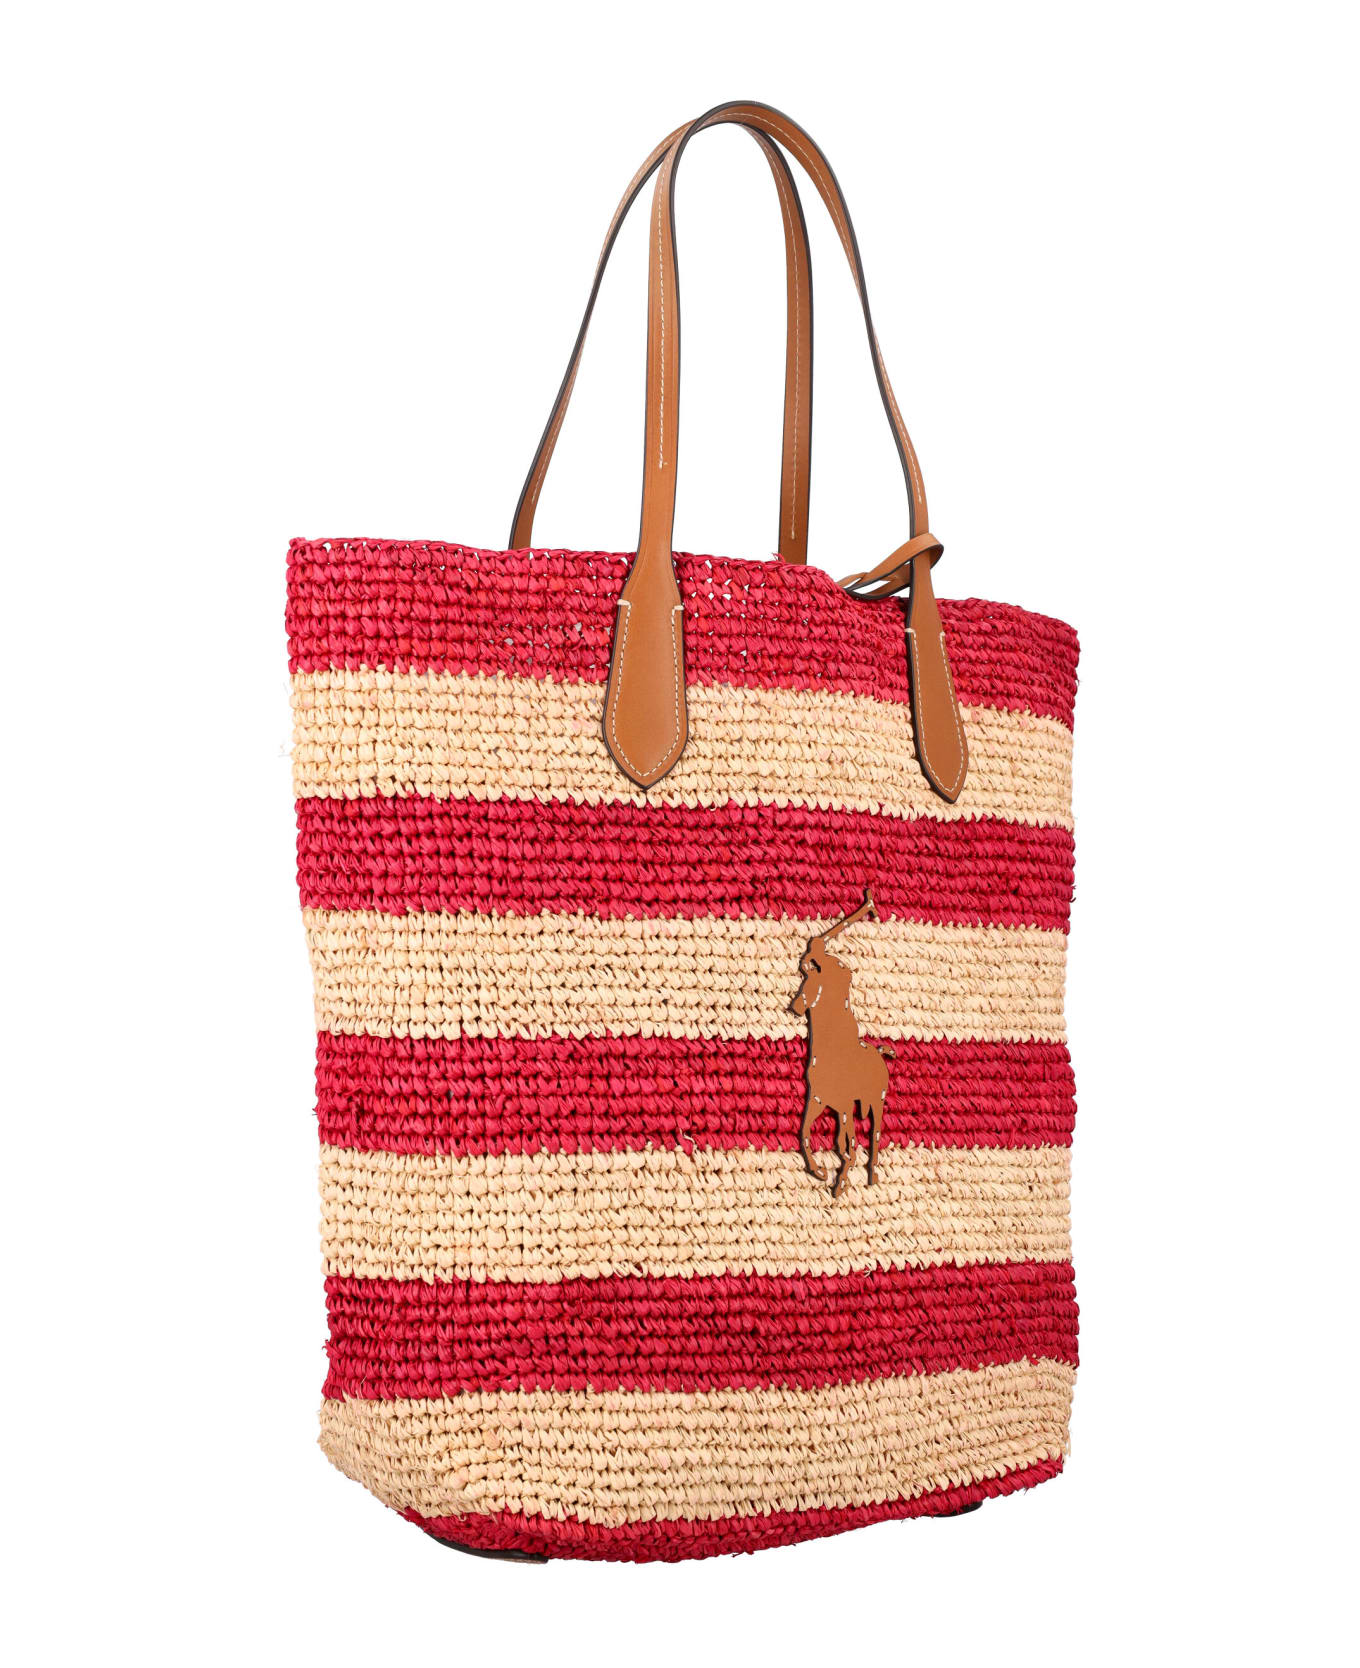 Polo Ralph Lauren Striped Straw Tote Bag - NATURAL RED トートバッグ